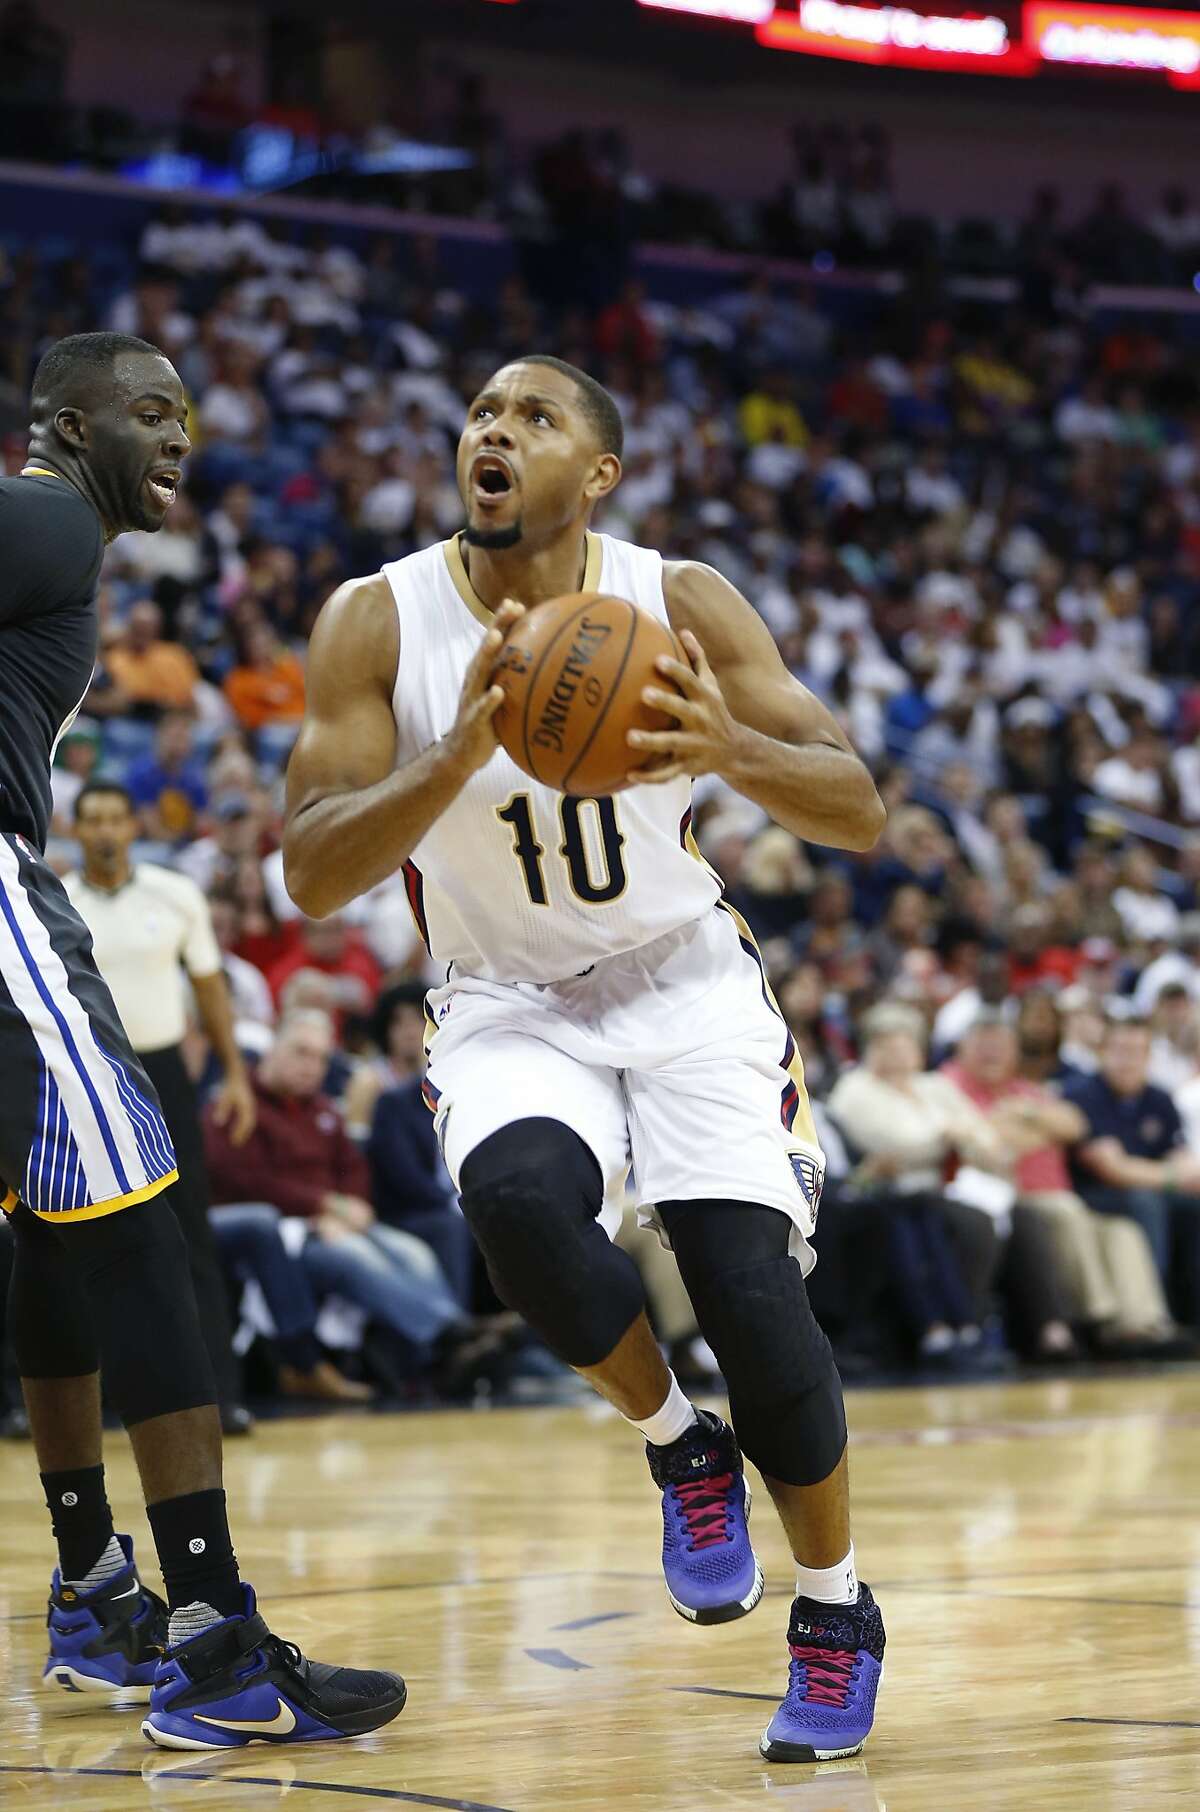 New Orleans Pelicans guard Eric Gordon (10) drives to the basket in the second half of an NBA basketball game against the Golden State Warriors in New Orleans, Saturday, Oct. 31, 2015. The Warriors won 134-120. (AP Photo/Gerald Herbert)